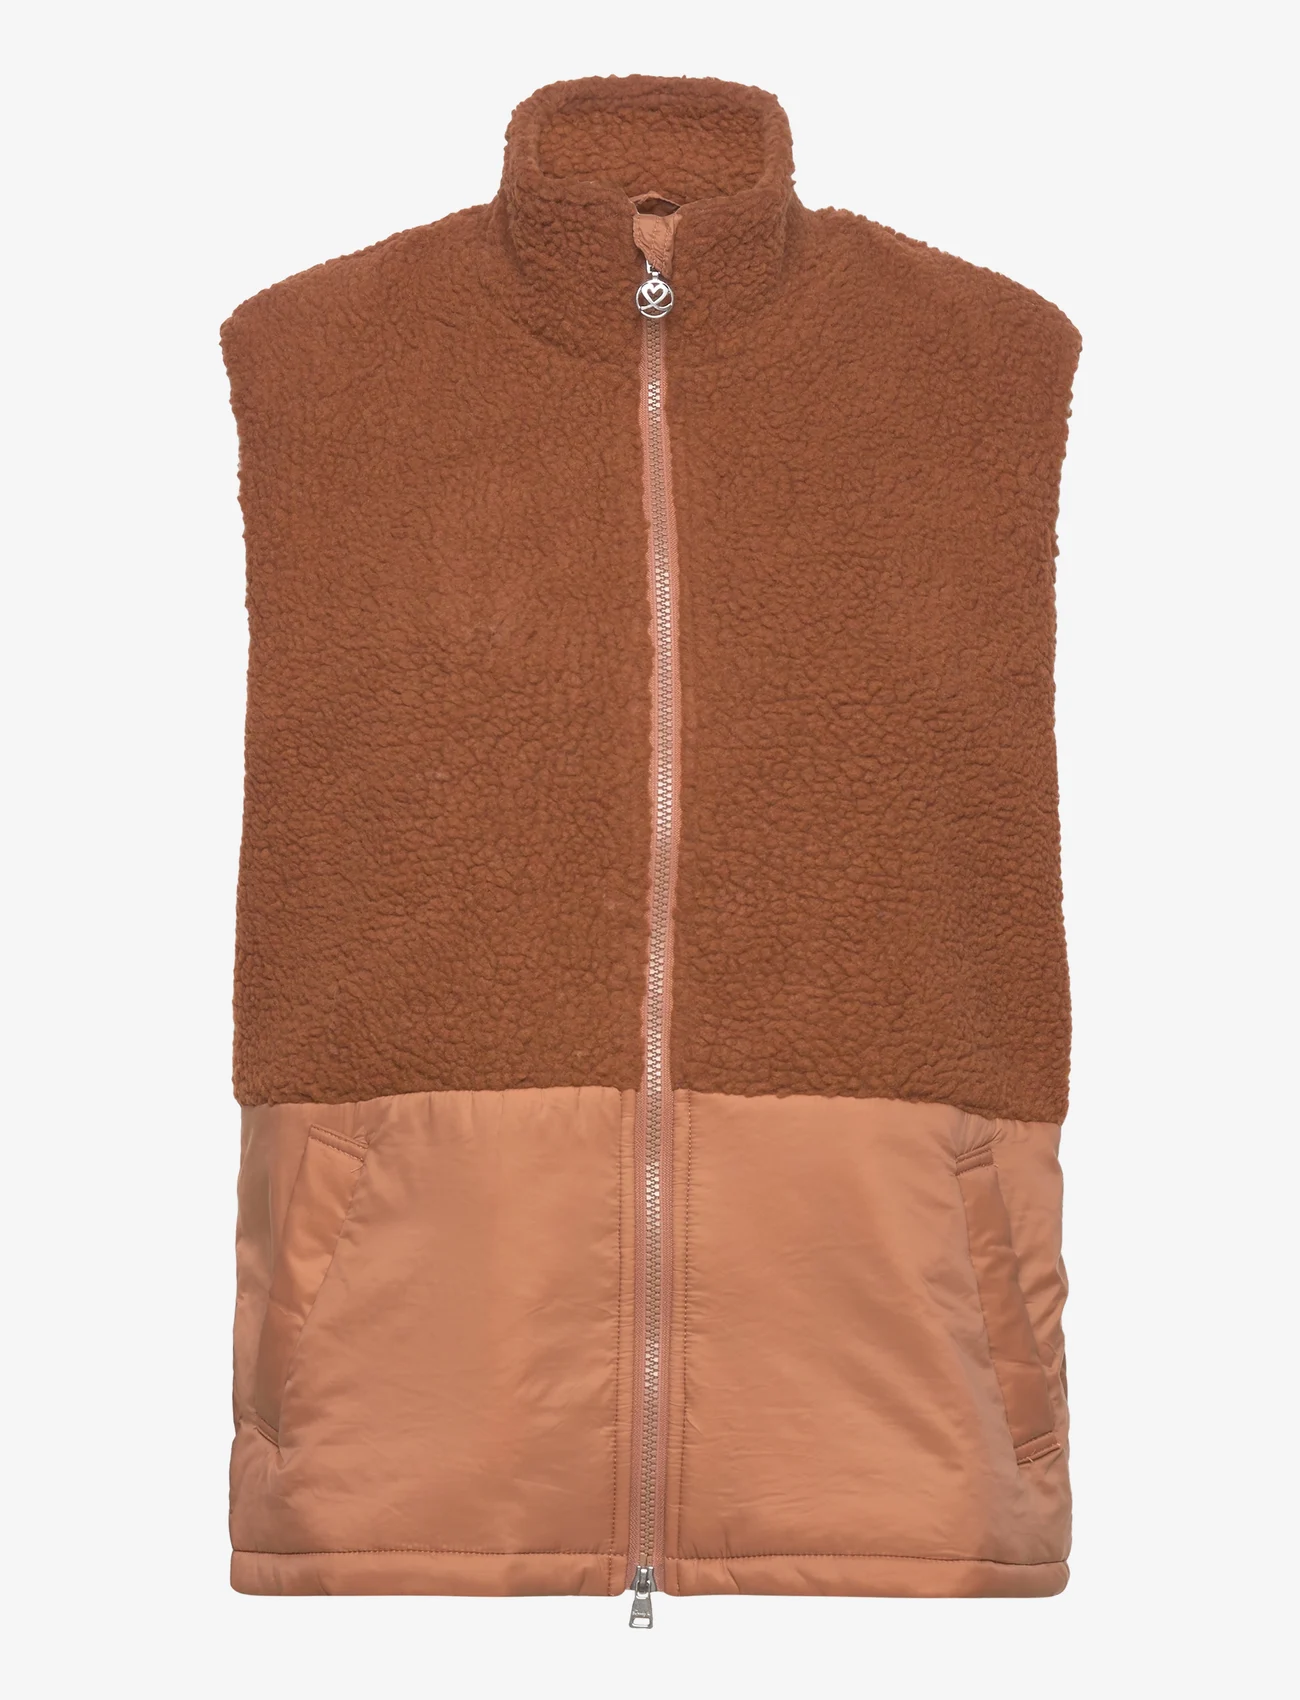 Daily Sports - LECCE VEST - quilted vests - cinnamon - 0